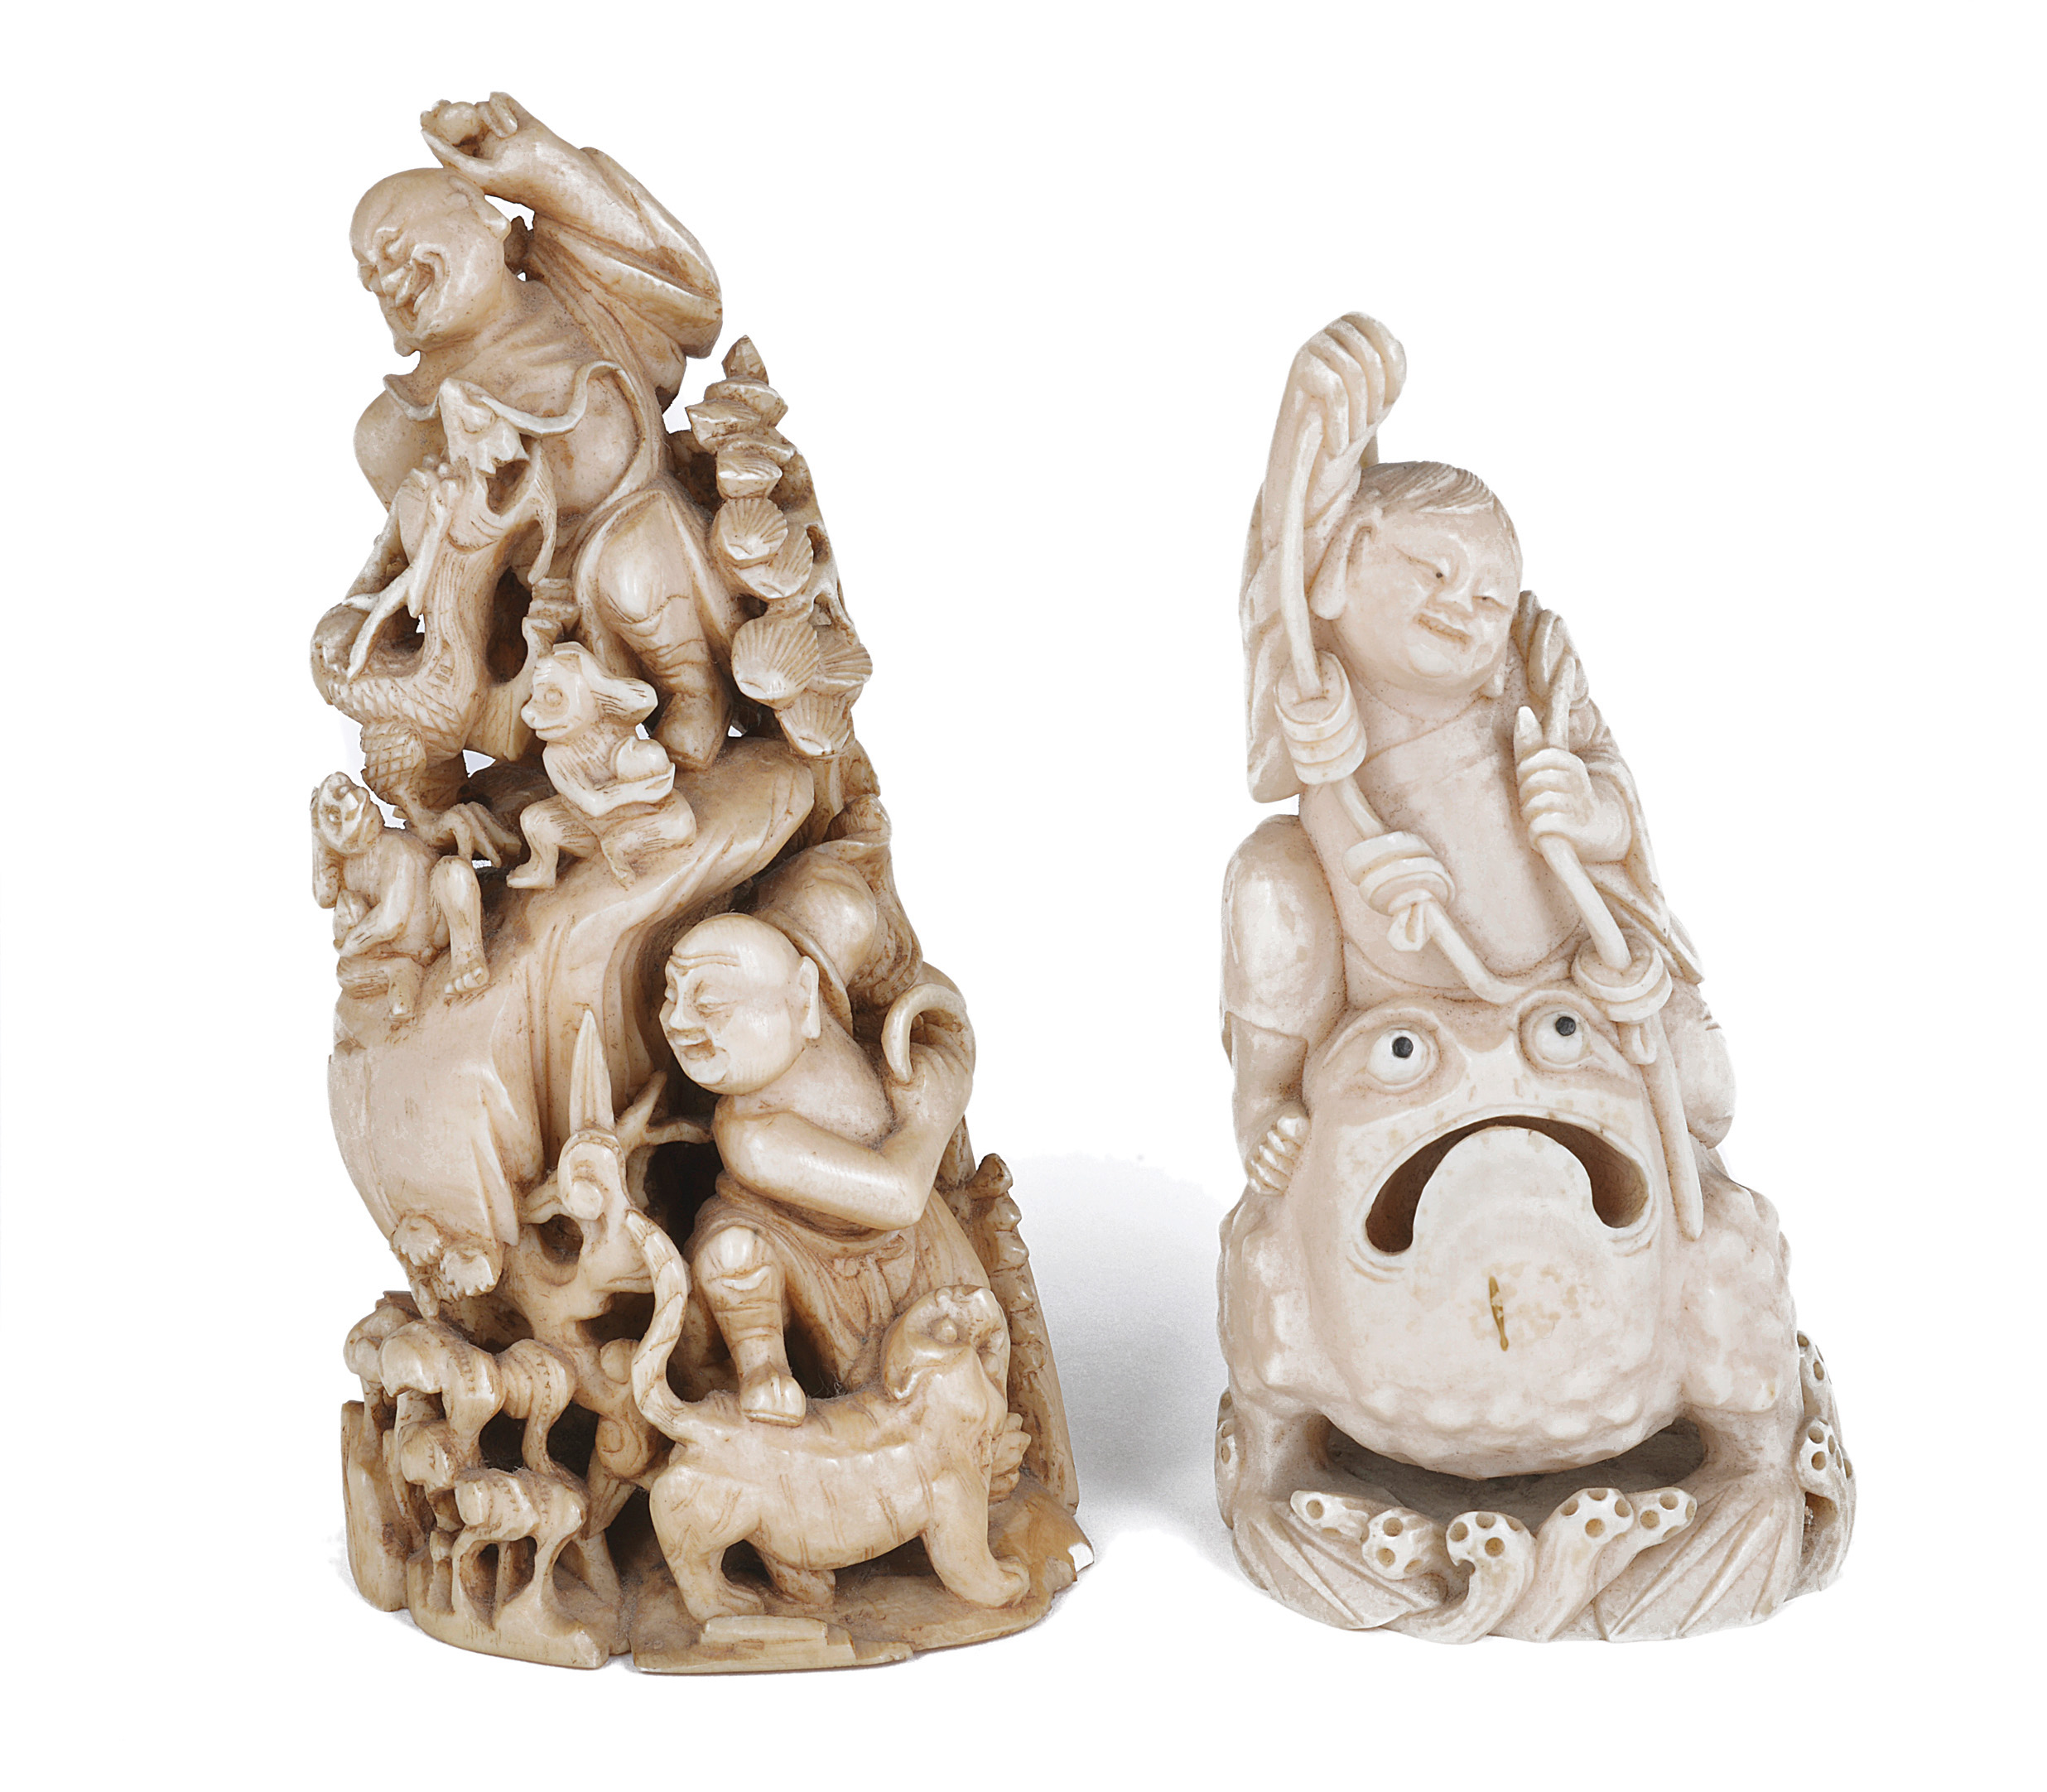 TWO CHINESE IVORY CARVINGS, LATE QING one carved with two figures on a rock with pine trees,